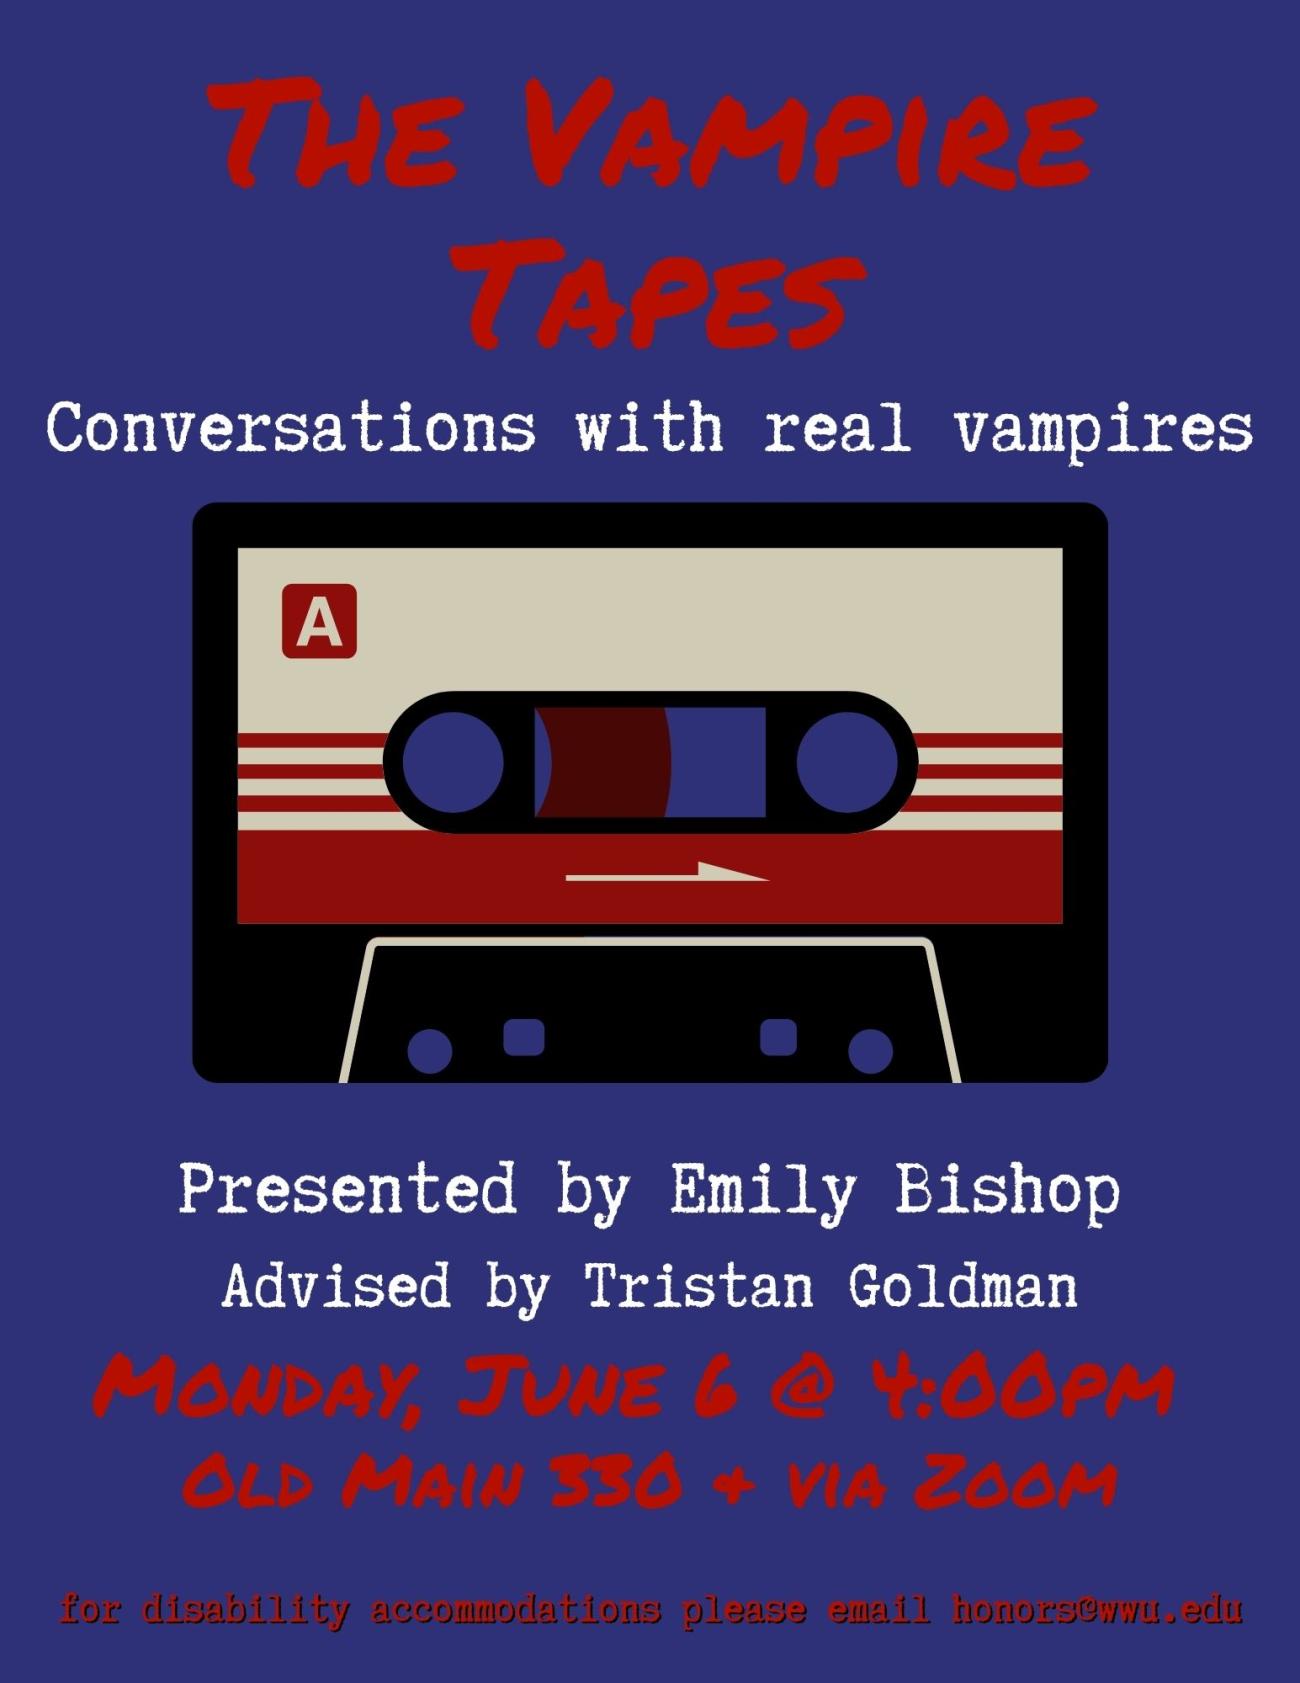 A poster with a blue background and a cassette tape. The text reads: “The Vampire Tapes, Conversations with real vampires. Presented by Emily Bishop, Advised by Tristan Goldman. Monday, June 6 @ 4:00pm. Old Main 330 & via Zoom. For disability accommodations please email honors@wwu.edu."